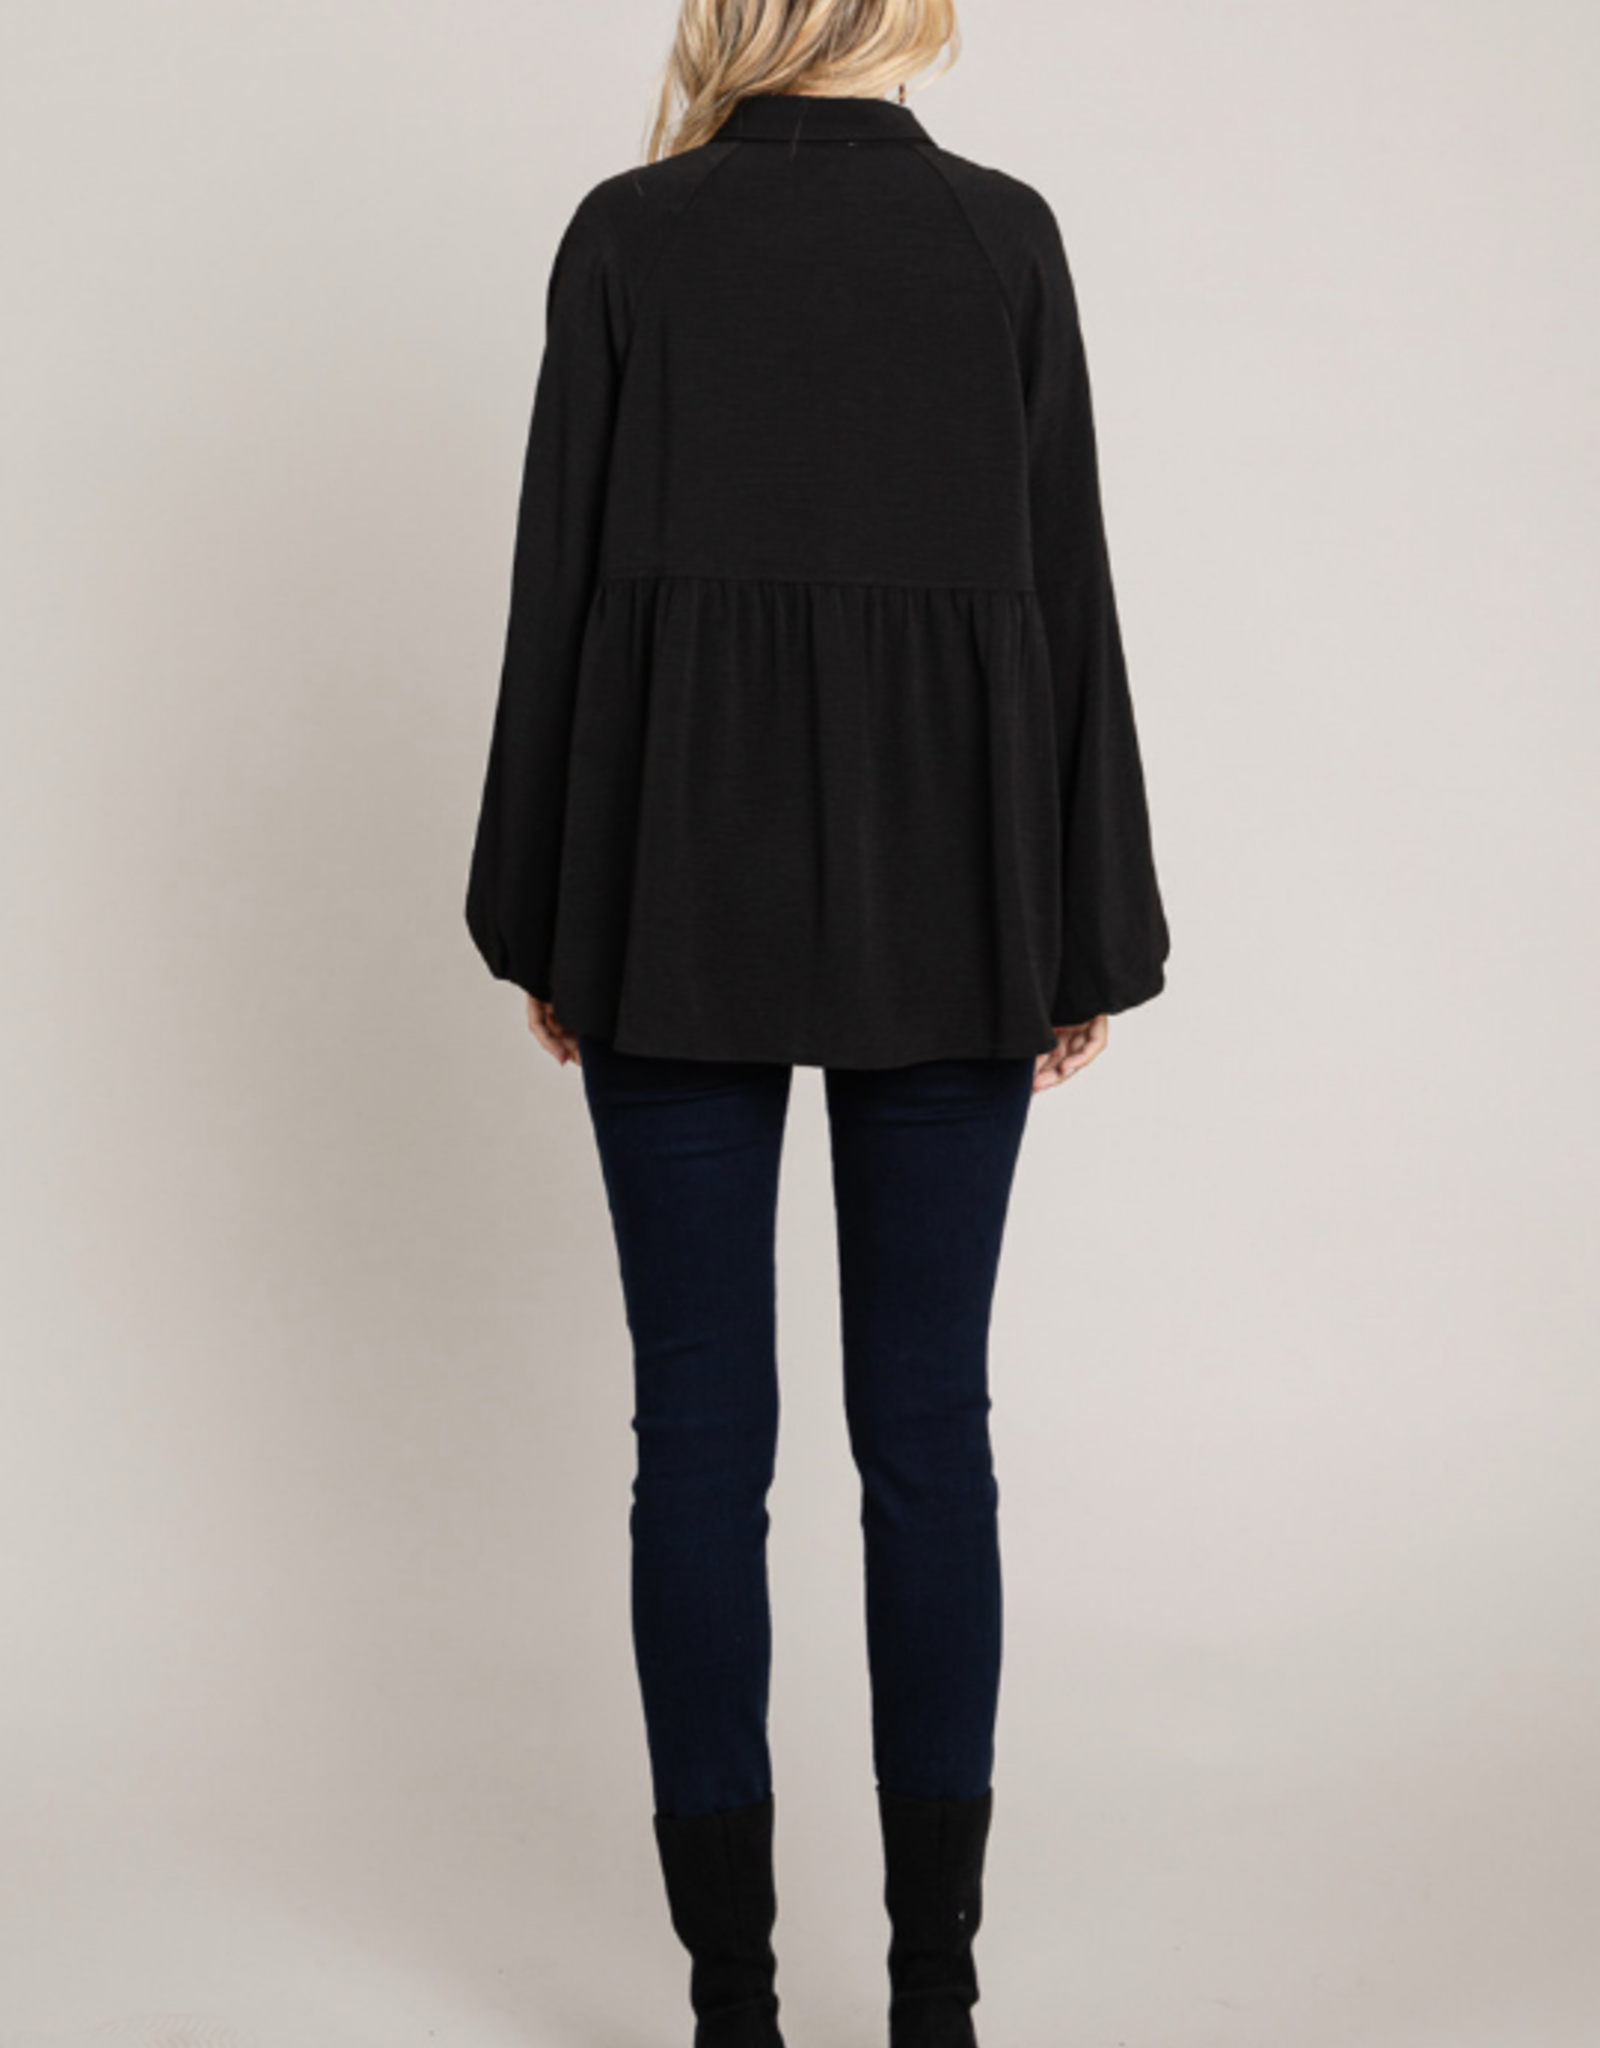 Black Textured Button-Up Babydoll Long Sleeve Top - Evelie Blu Boutique